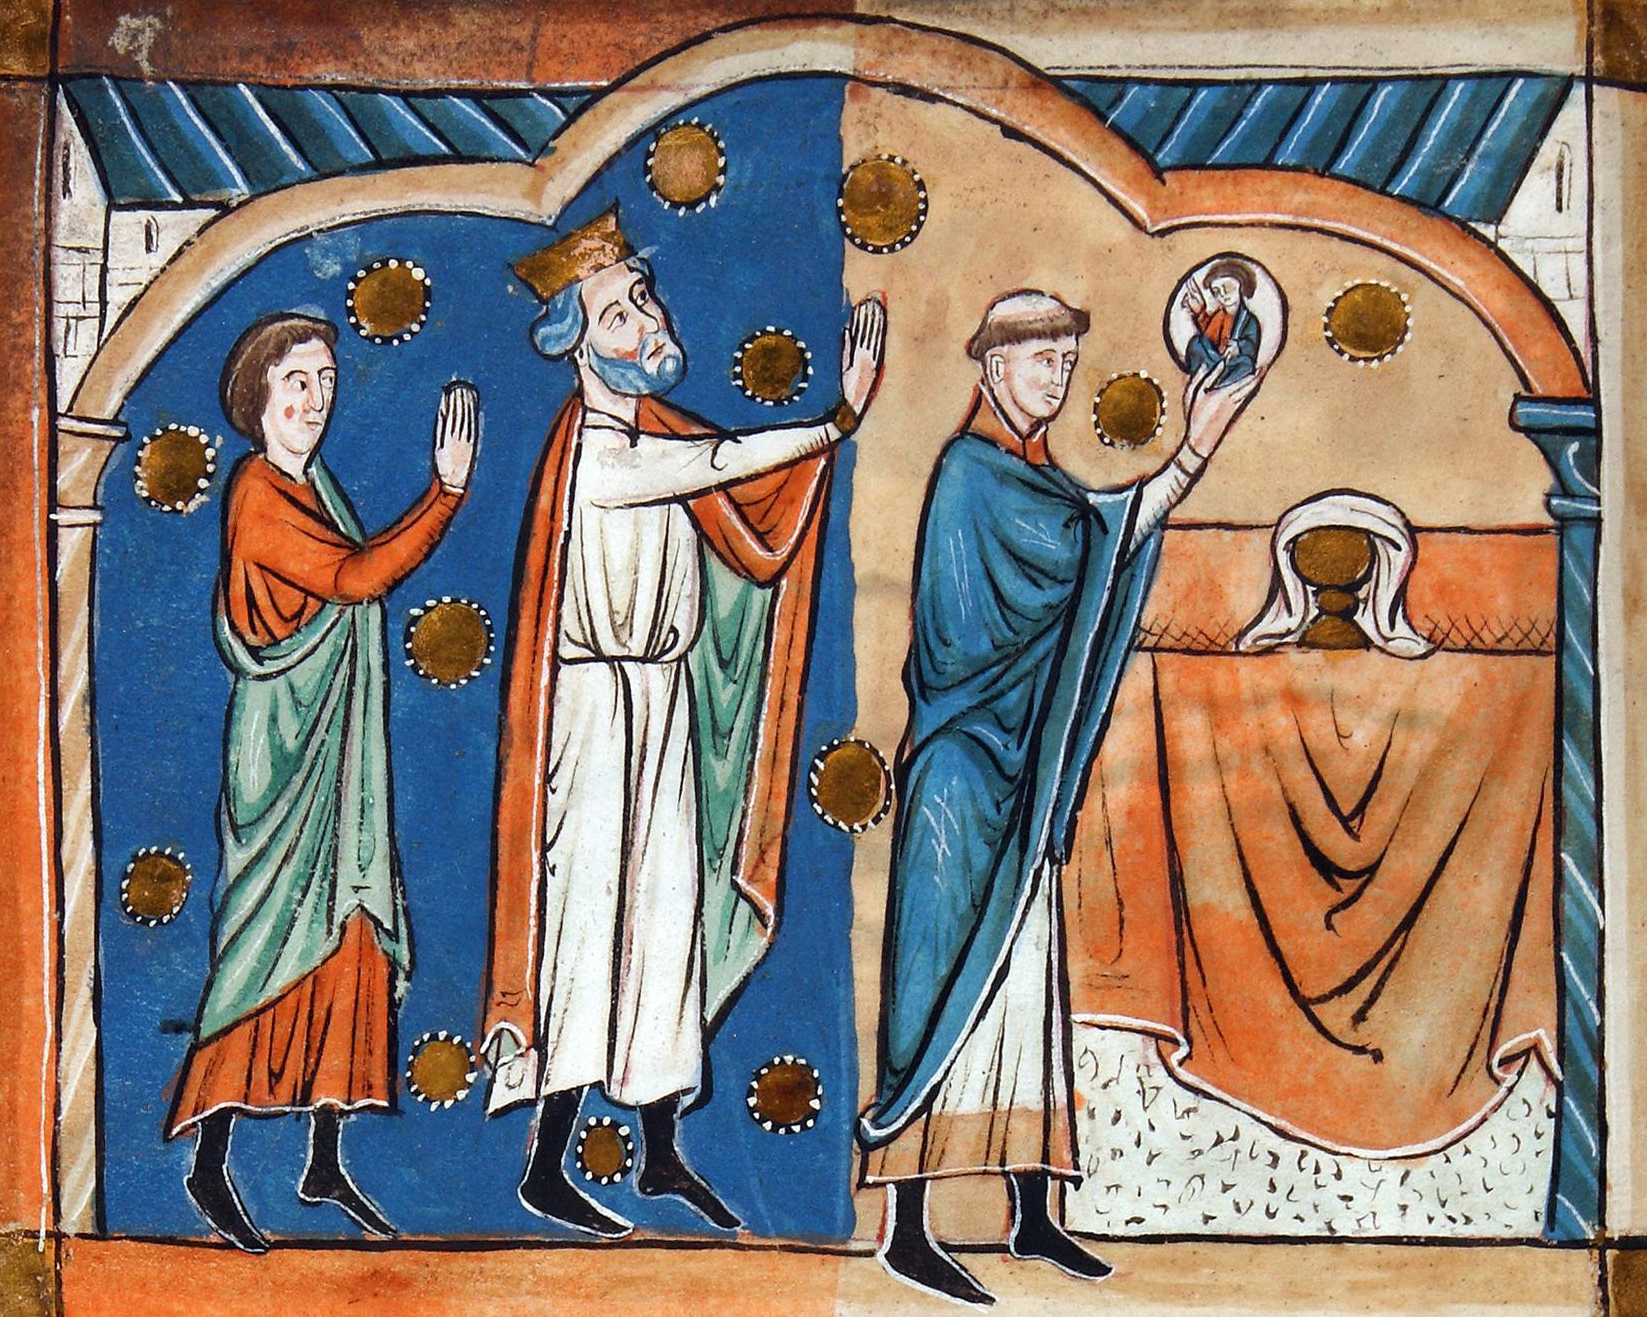 Edward the Confessor, clad in a white robe, stands with his hands in prayer next to a man with a shaved scalp who is holding an image of Christ.